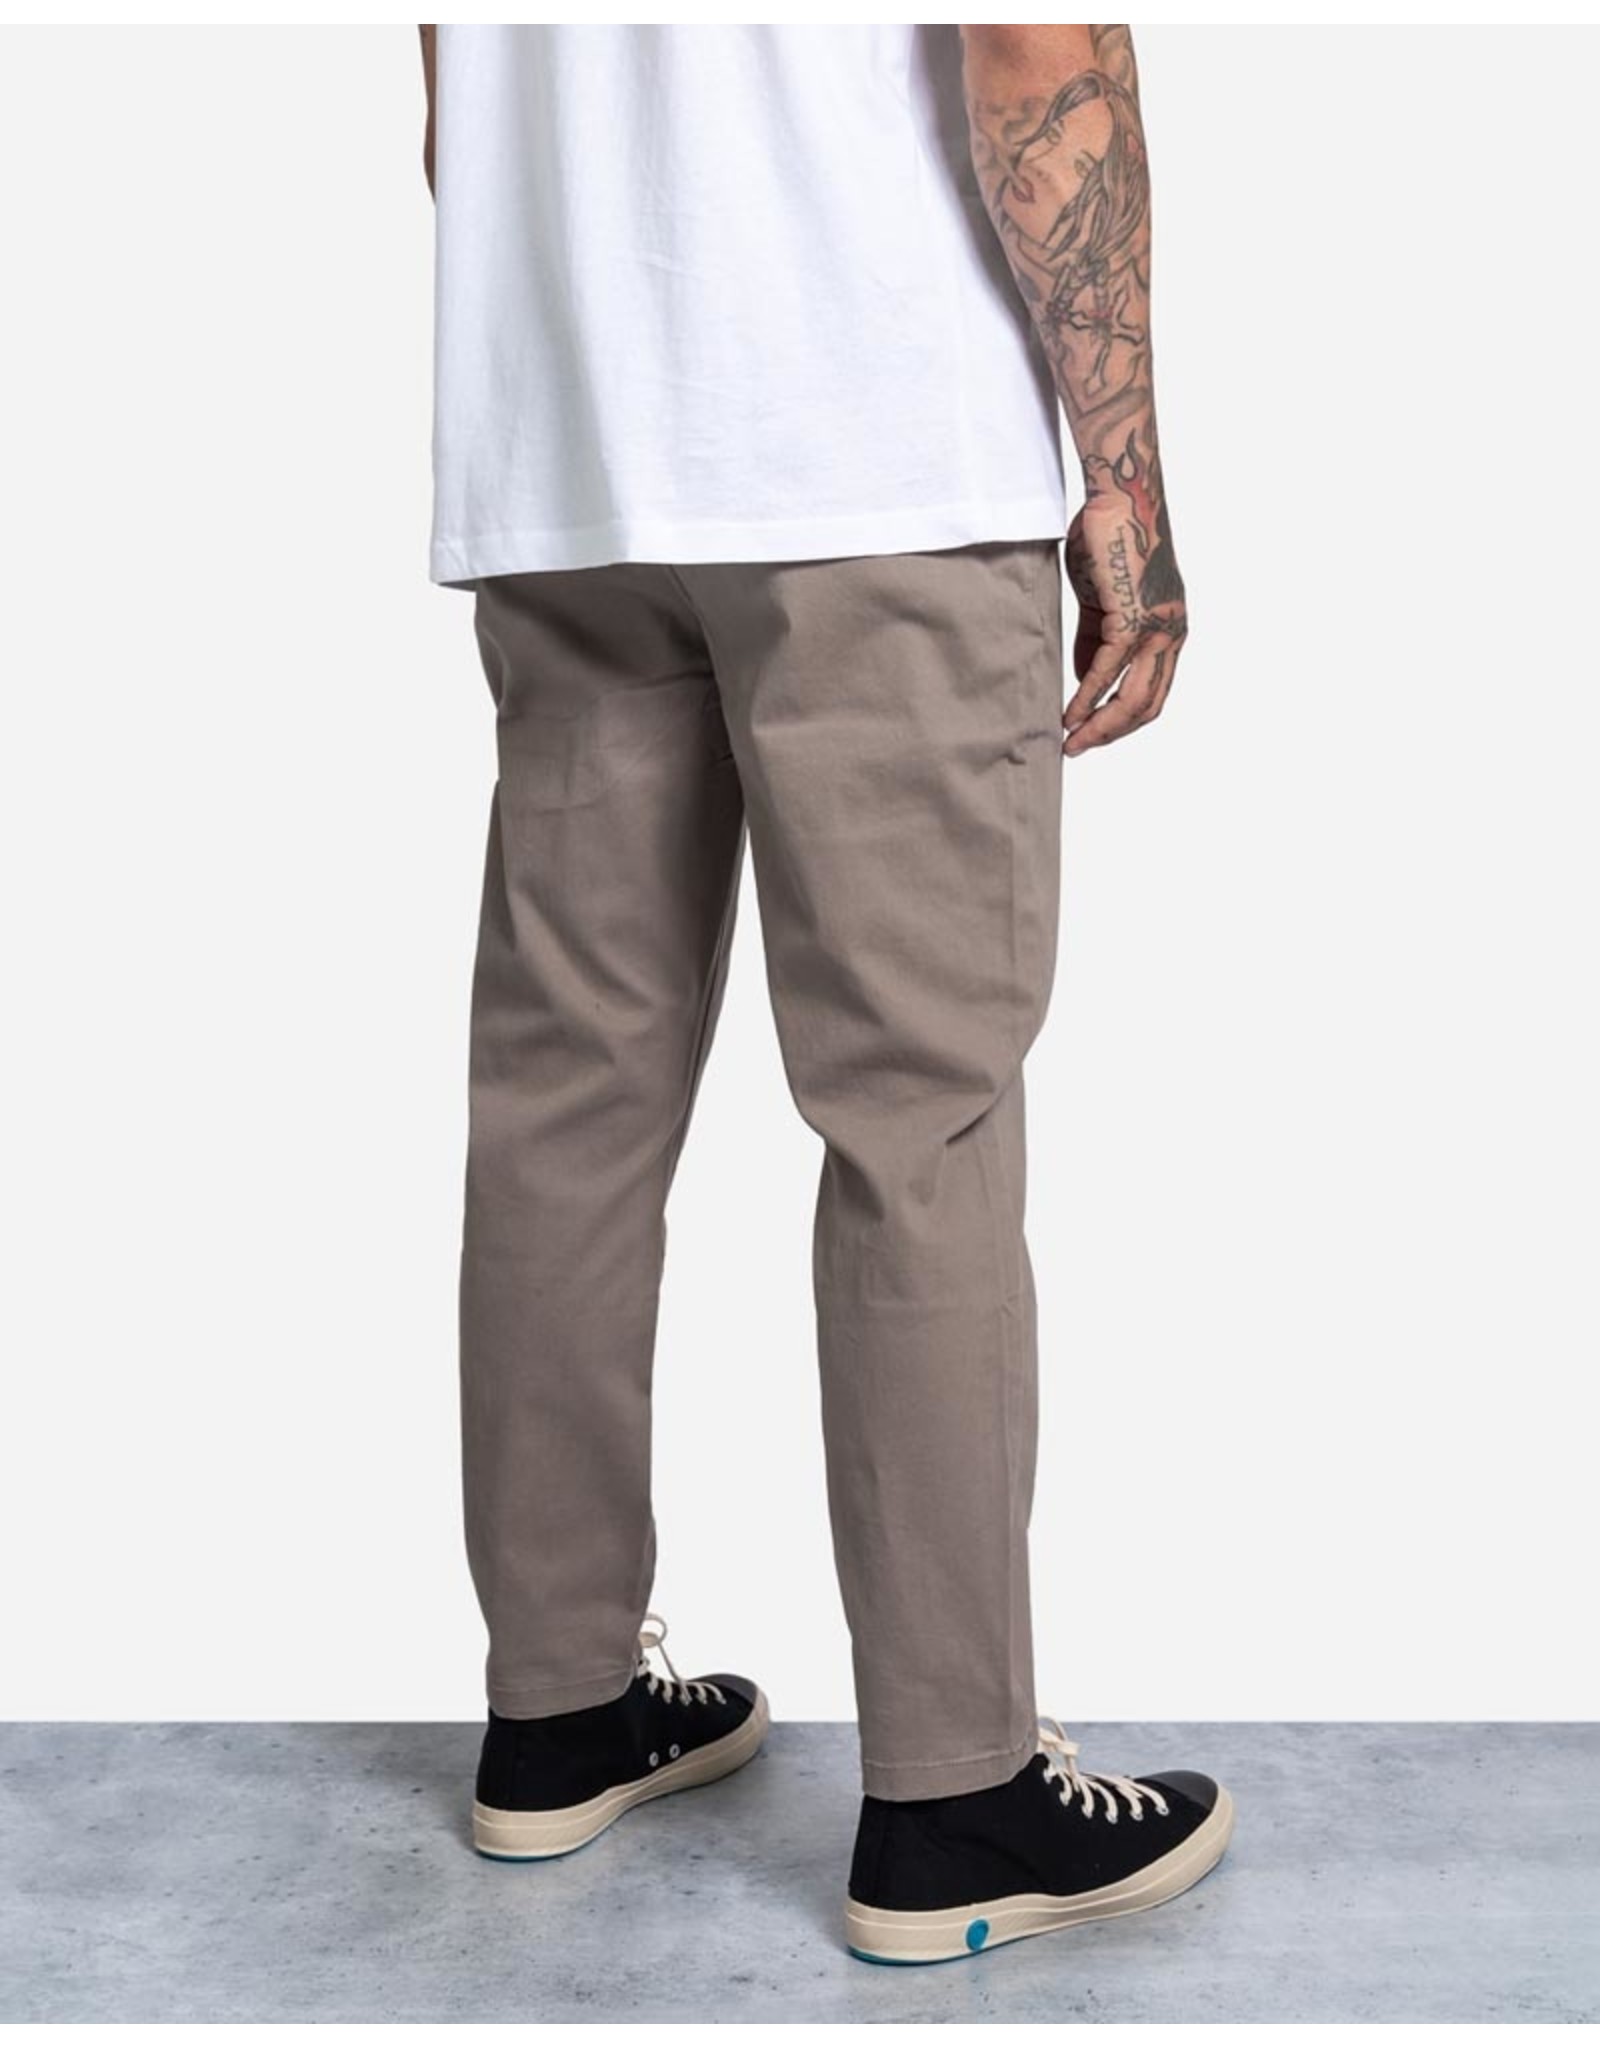 Lost Lost Master Hybride Pant Driftwood